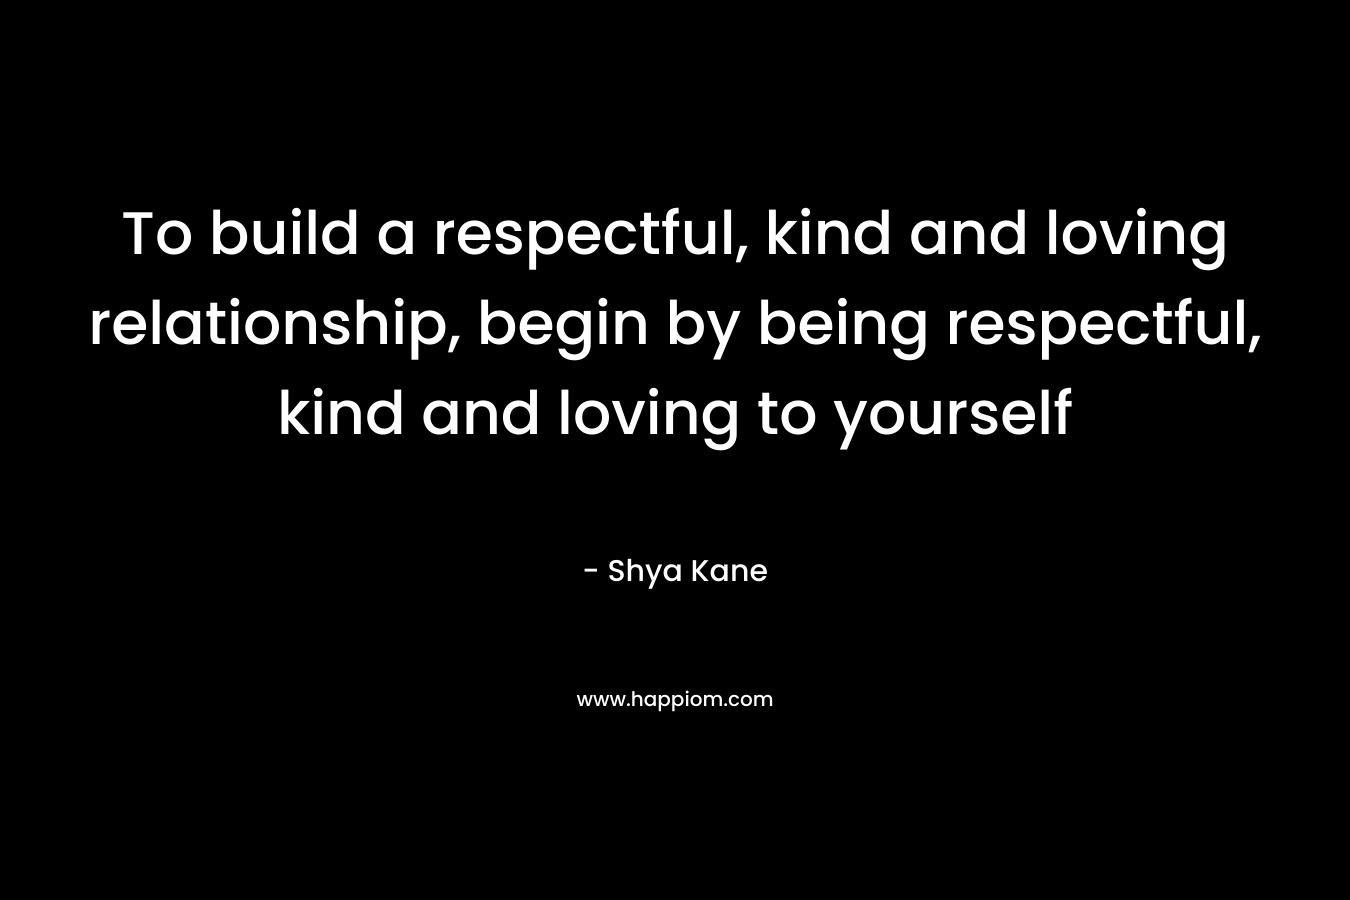 To build a respectful, kind and loving relationship, begin by being respectful, kind and loving to yourself